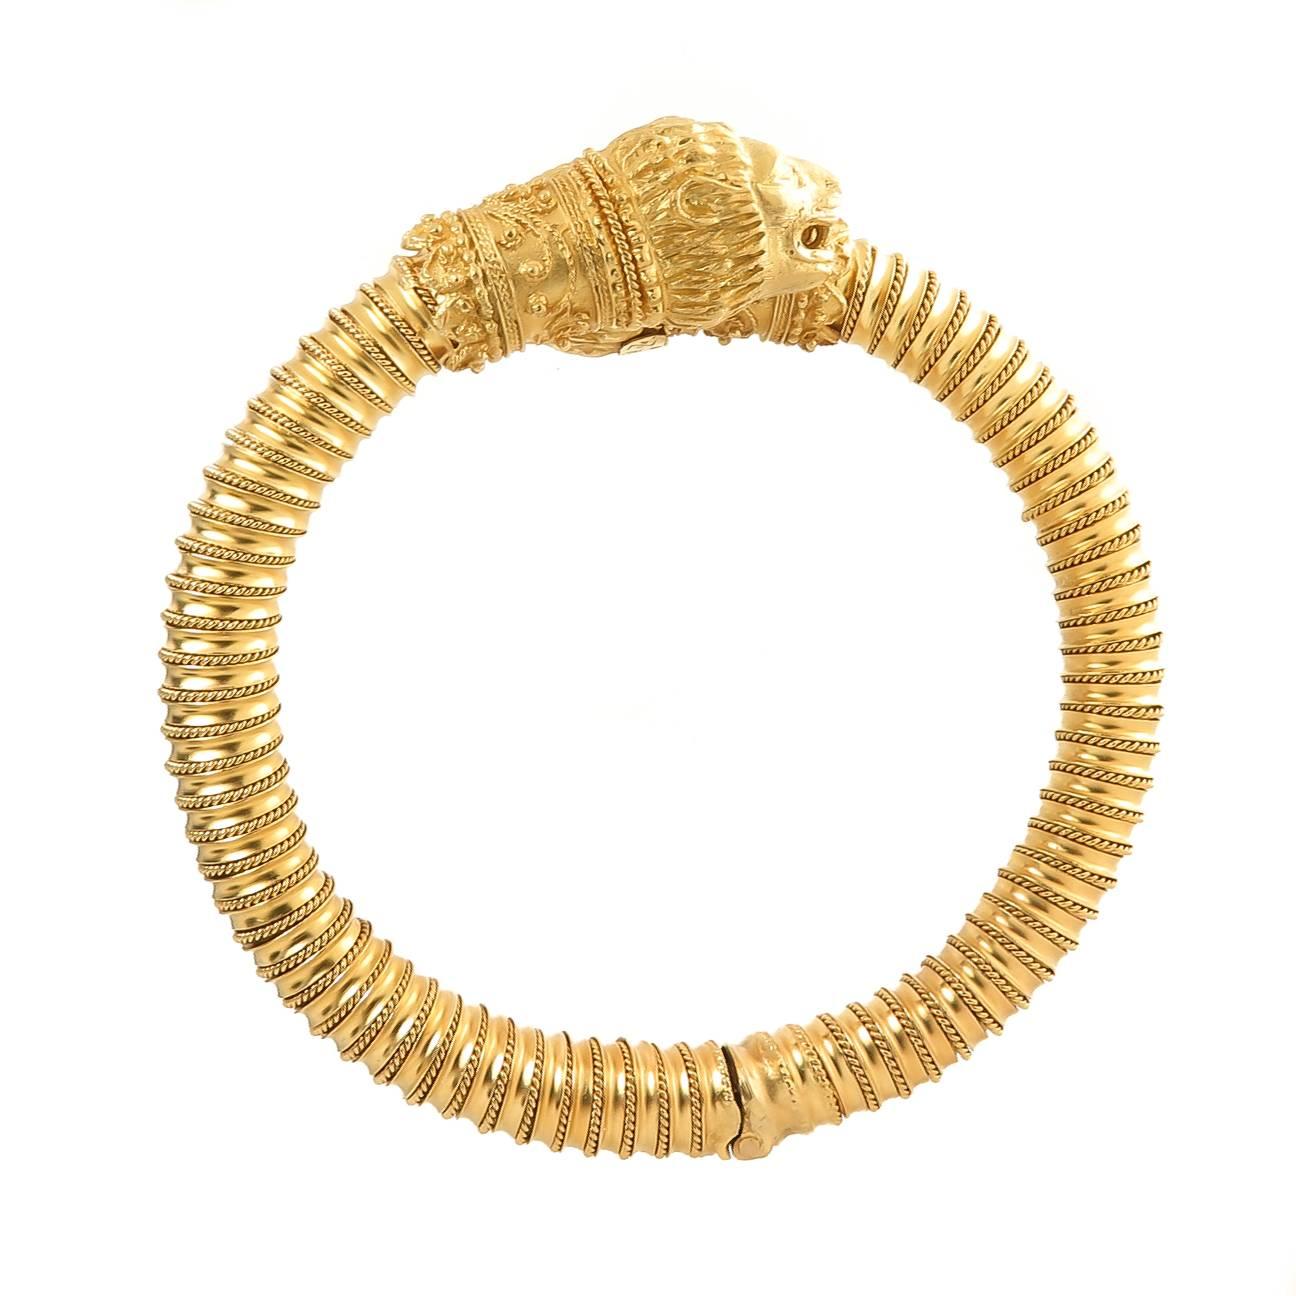 Circa 1980s Zolotos 22K Yellow Gold Chimera Lion Head Bracelet, This solid bracelet measures 5/16 inch Diameter thick, the Lion Heads measure 5/8 X 1/2 inch. The inside measurement is 6 1/2 inch and the bracelet has a hinge and is adjustable for up